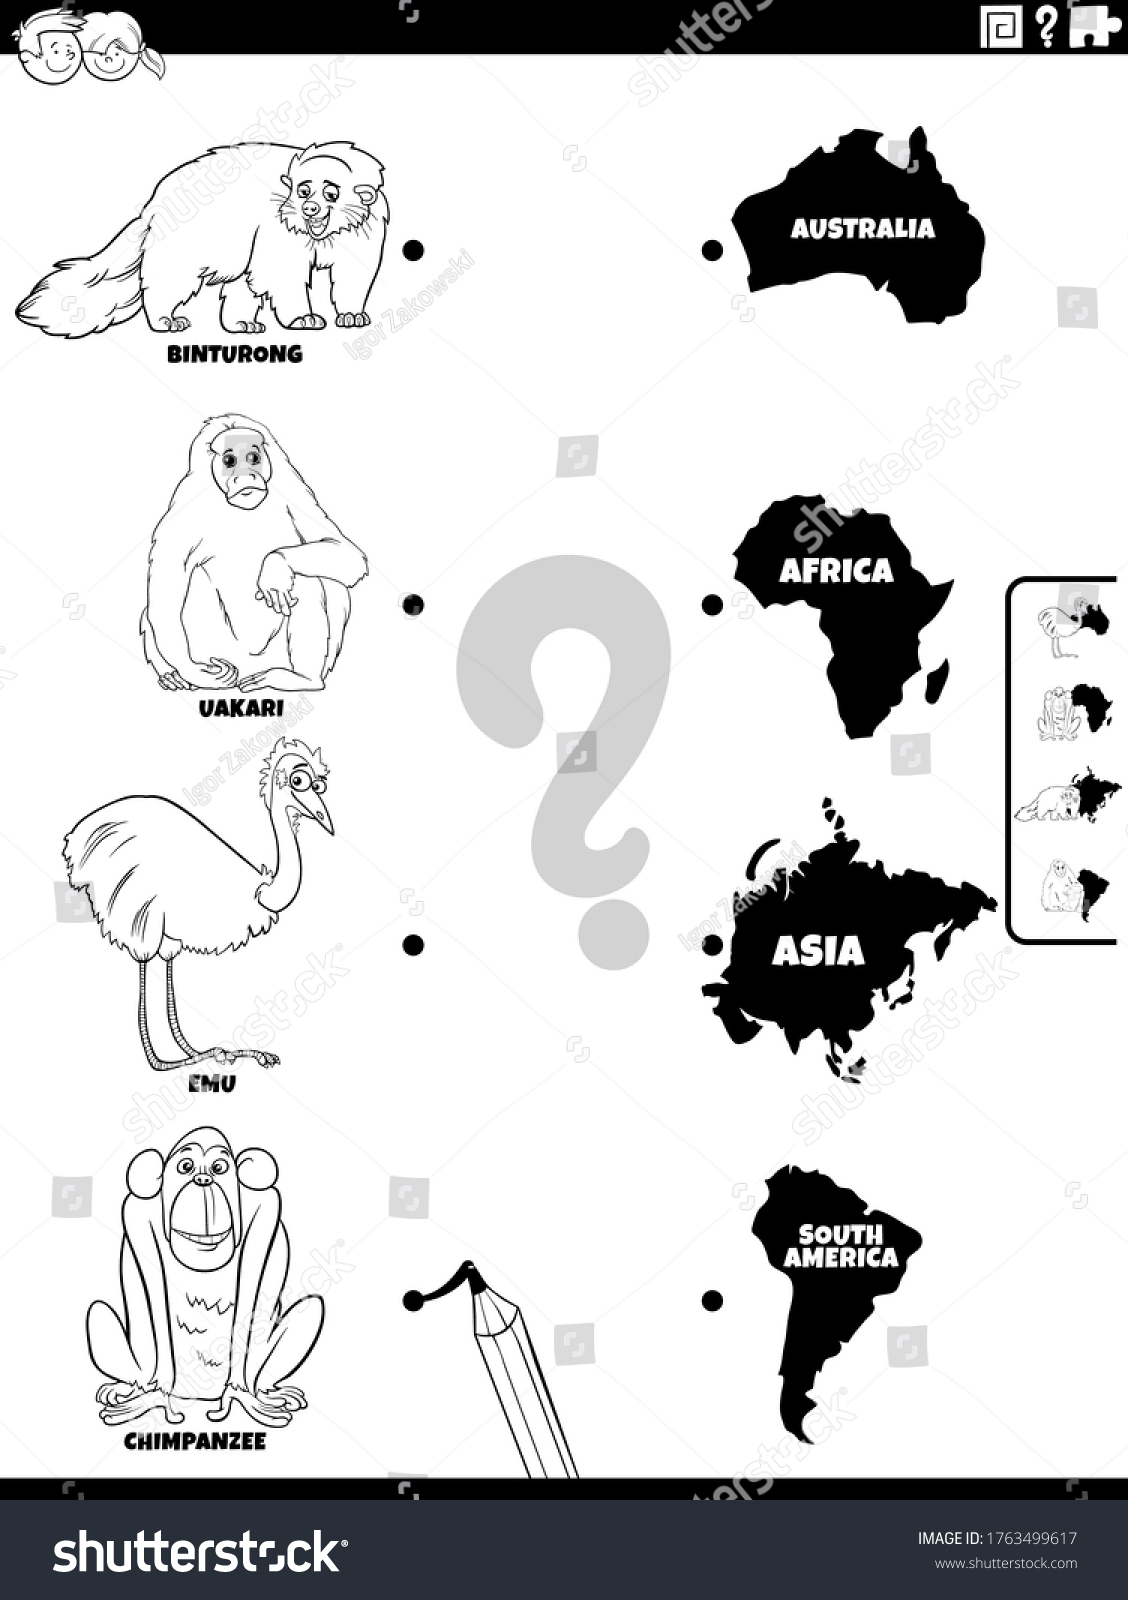 SVG of Black and White Cartoon Illustration of Educational Matching Game for Children with Wild Animal Species Characters and Continent Shapes Coloring Book Page svg